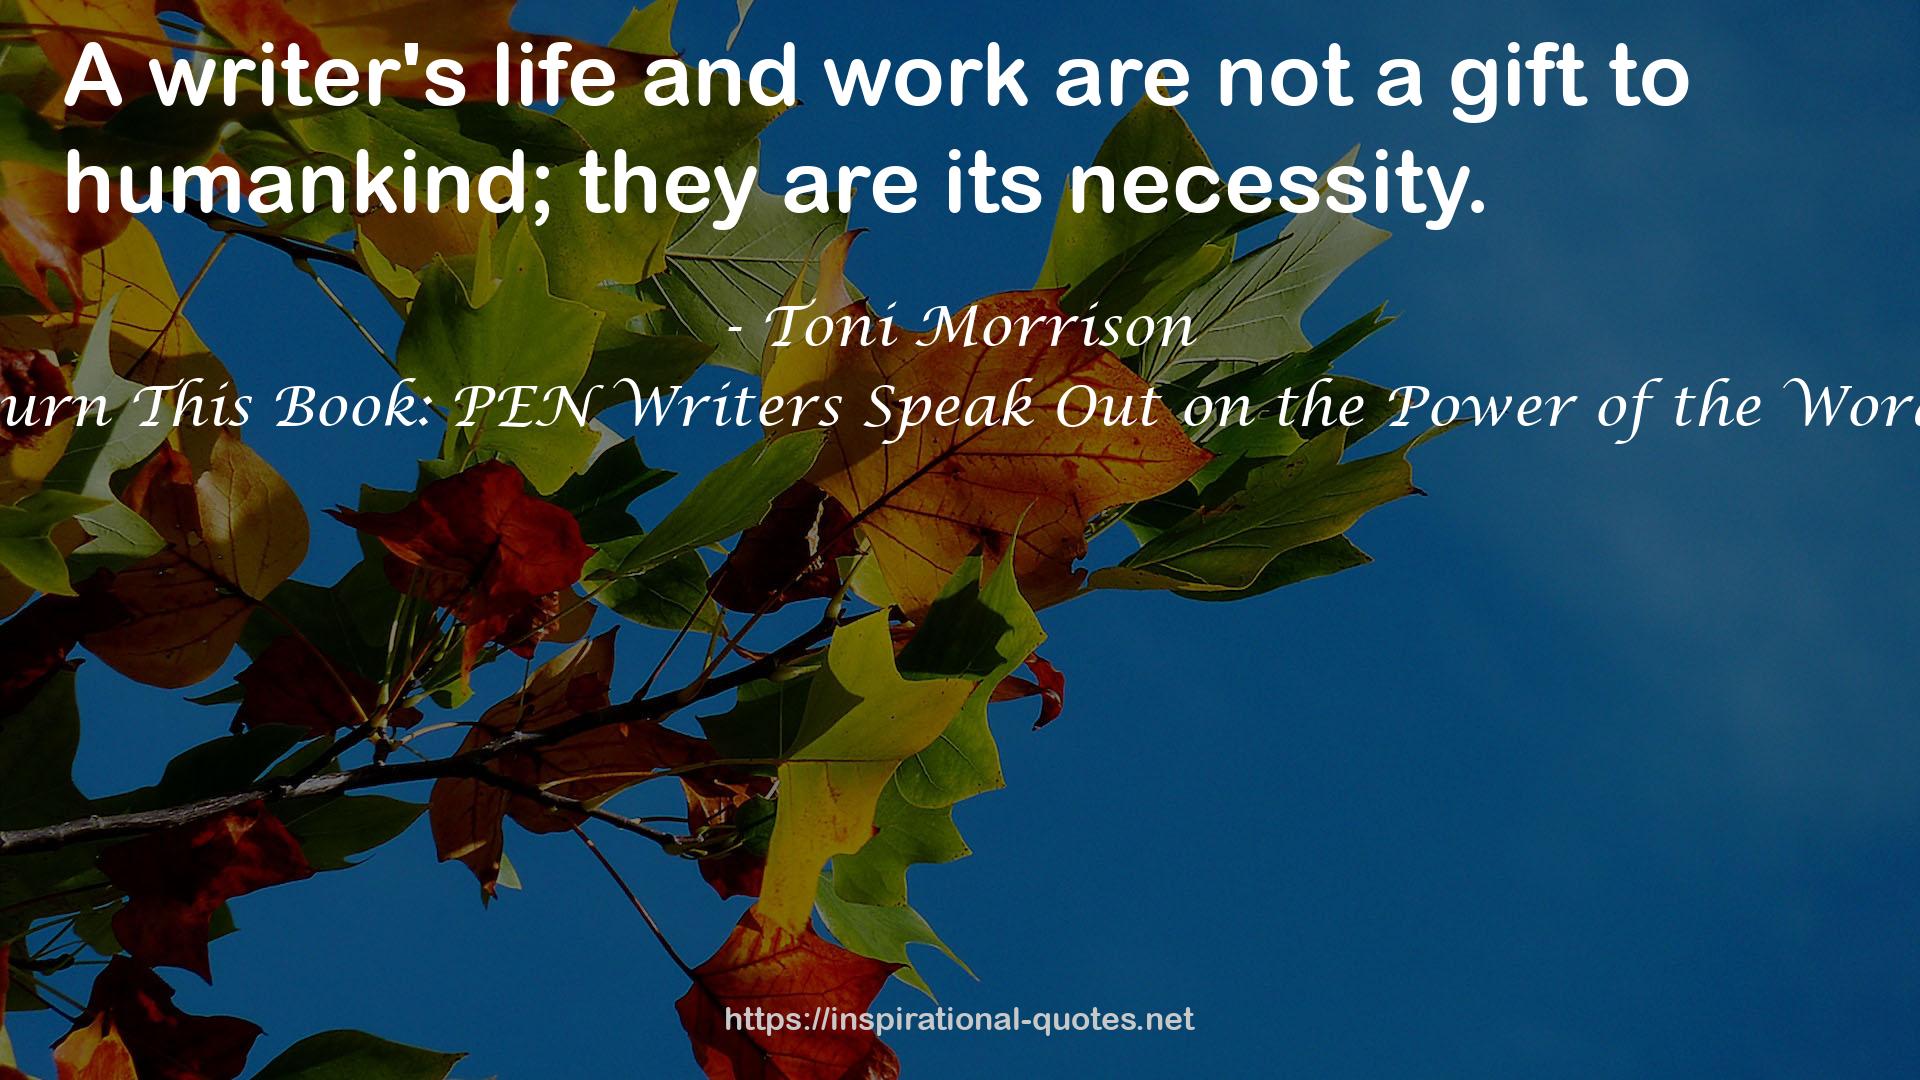 Burn This Book: PEN Writers Speak Out on the Power of the Word QUOTES